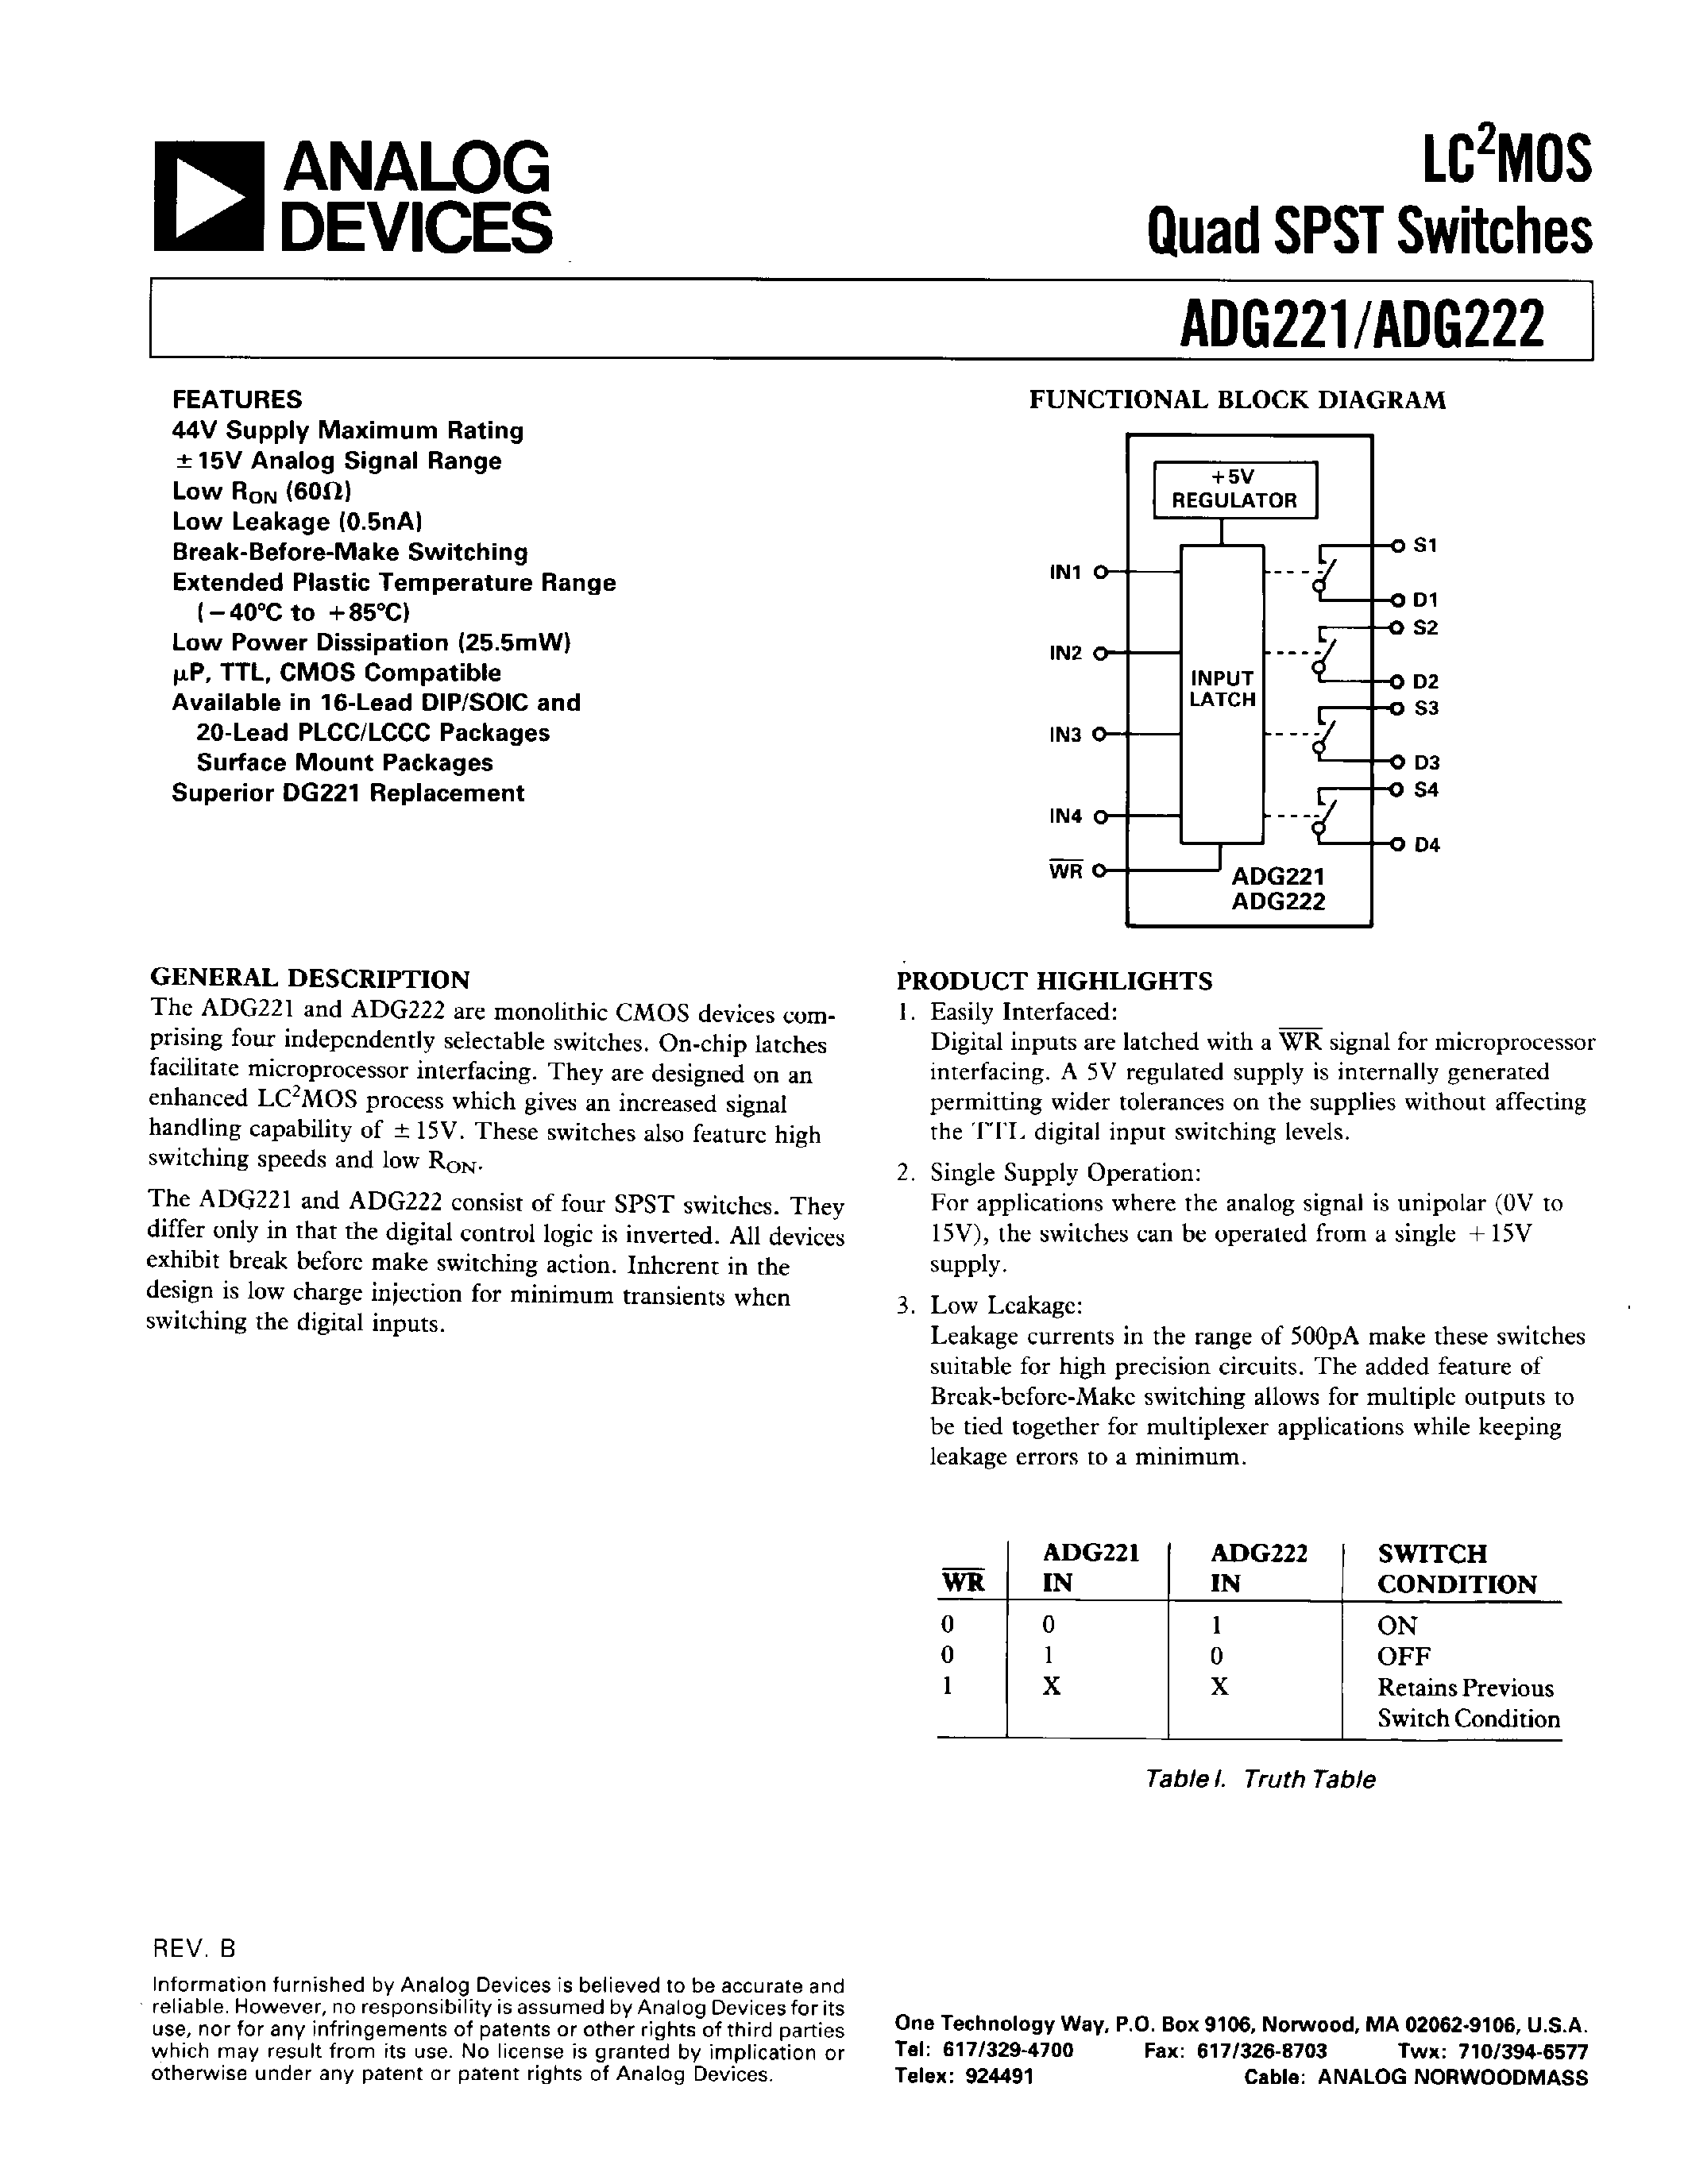 Datasheet ADG222KP - LC2MOS QUAD SPST SWITCHES page 1